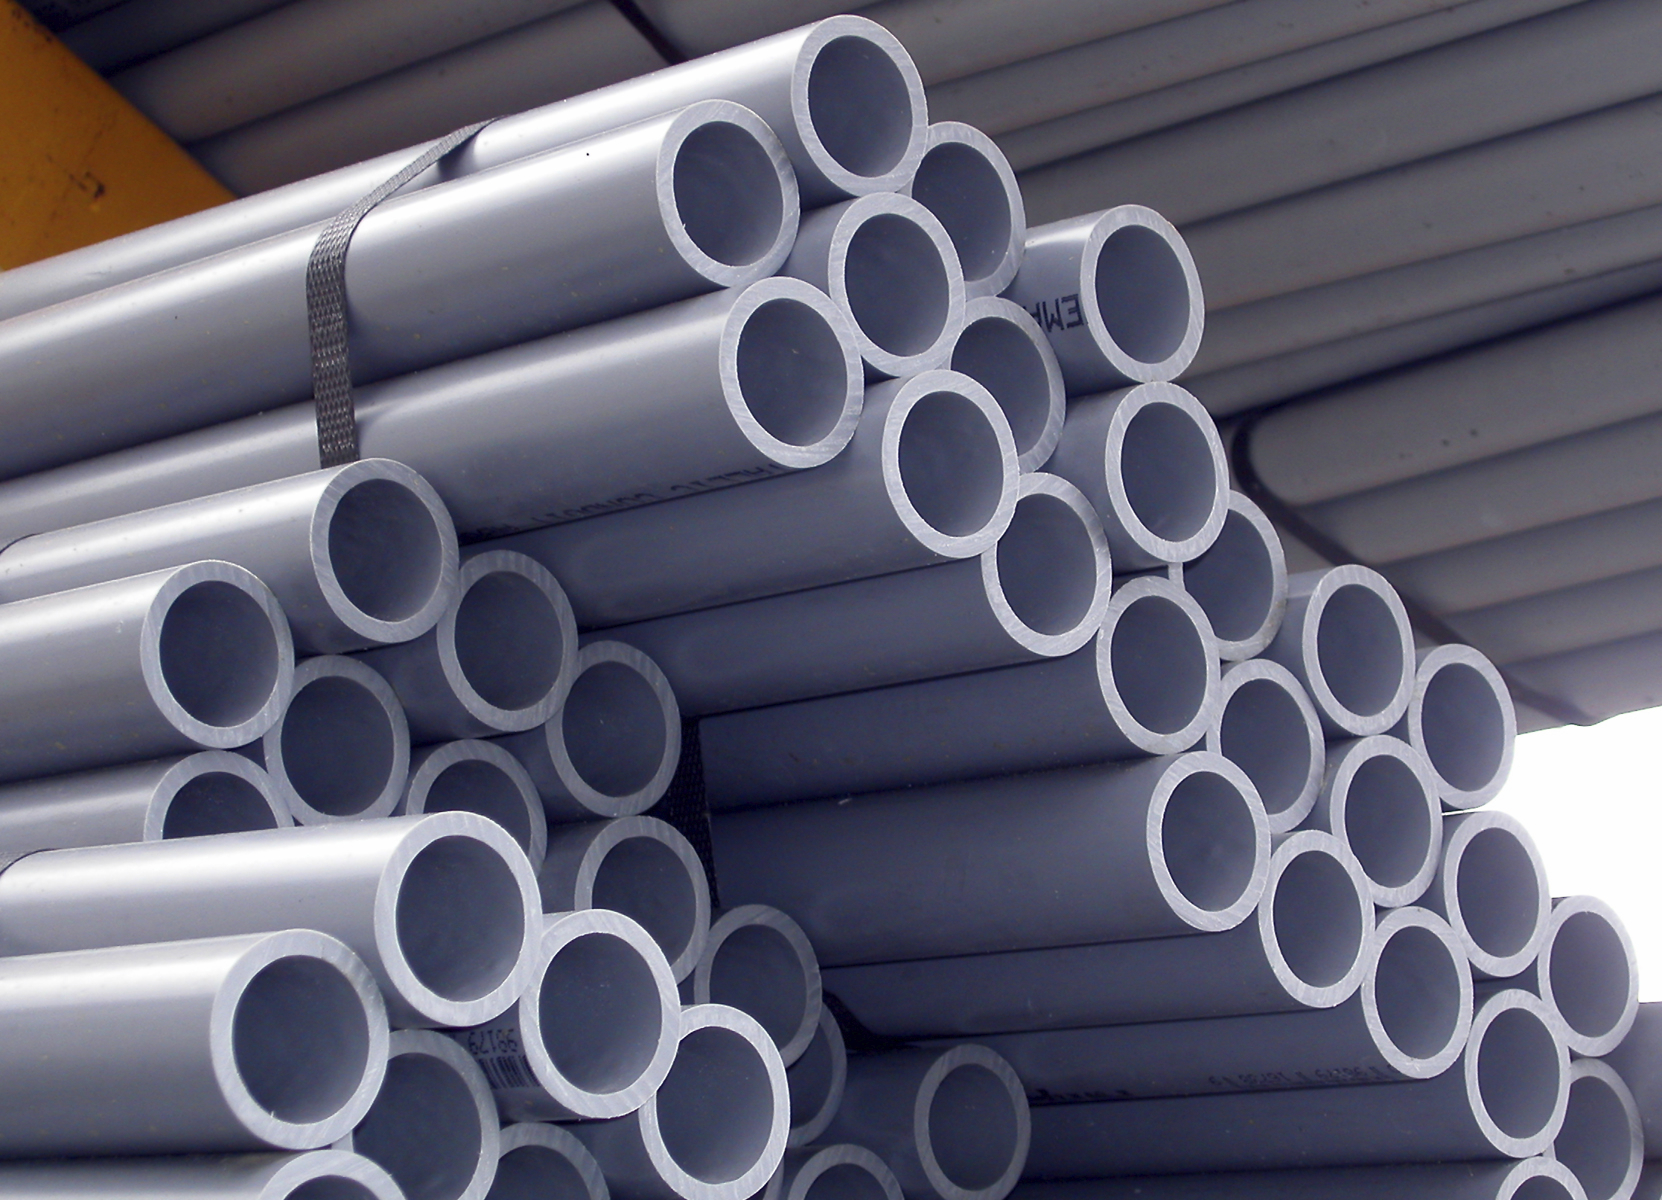 PVC Industrial Products keeps a wide range of CPVC Pipe and Fittings in